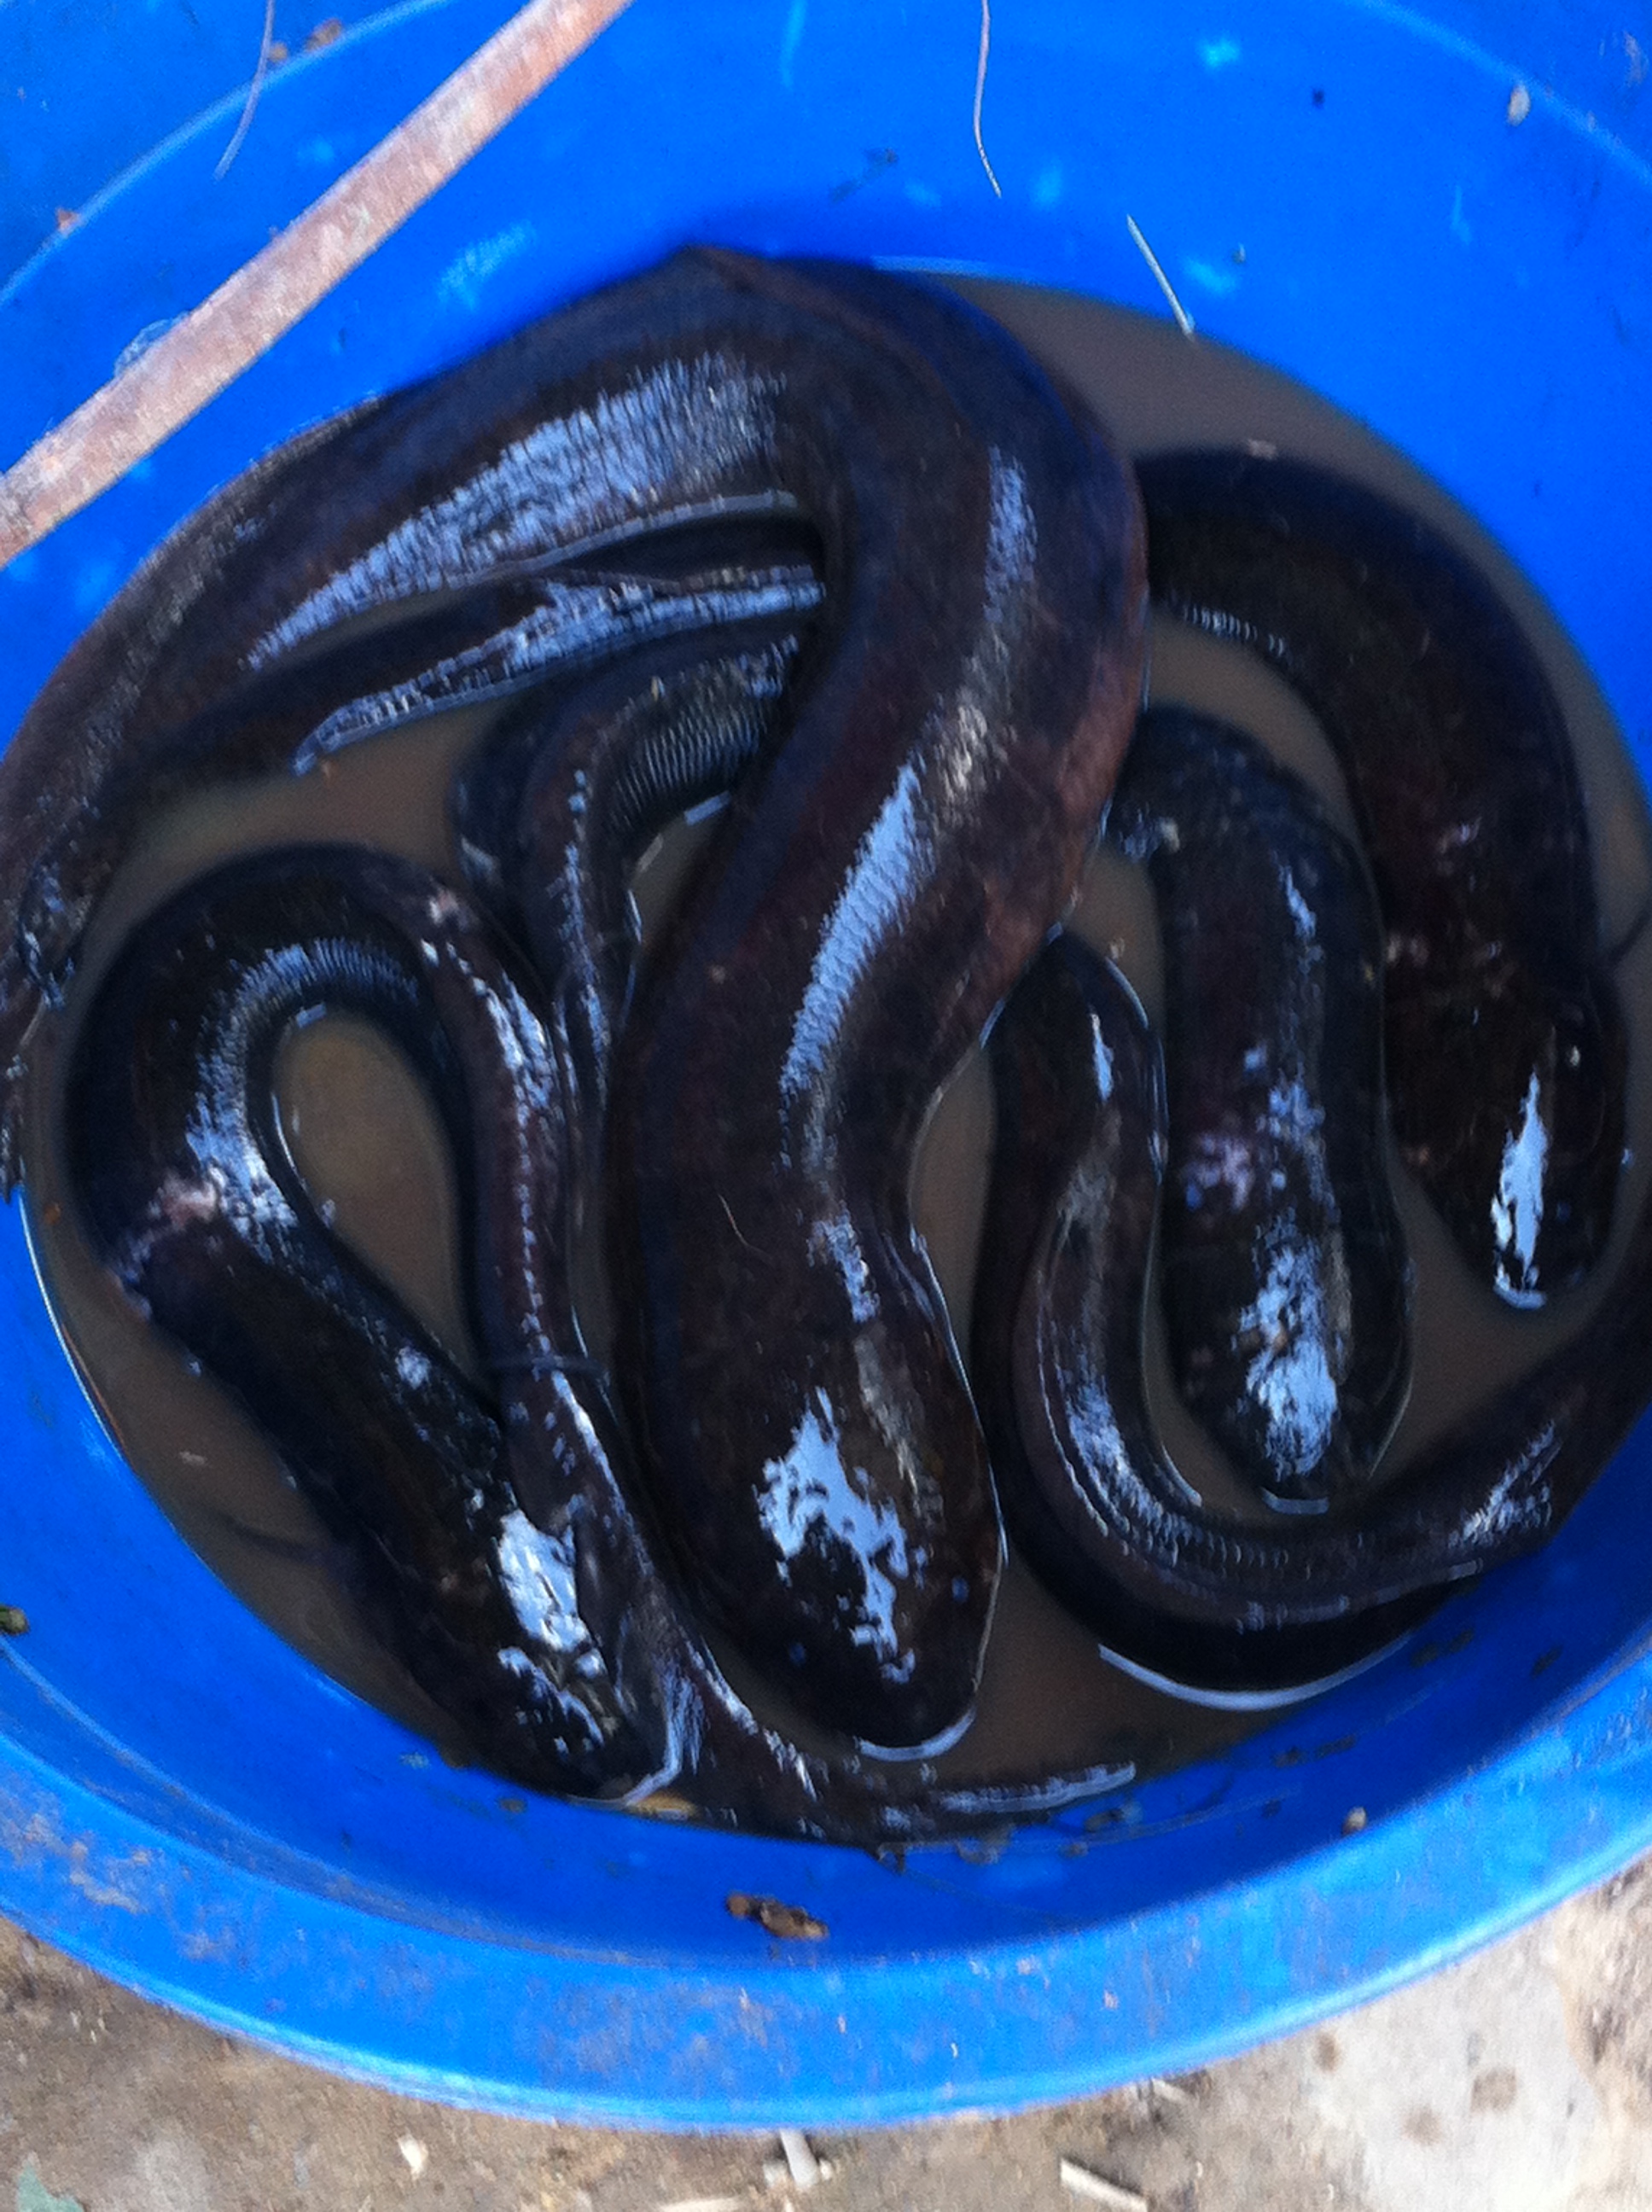 Electric fish for sale in the market